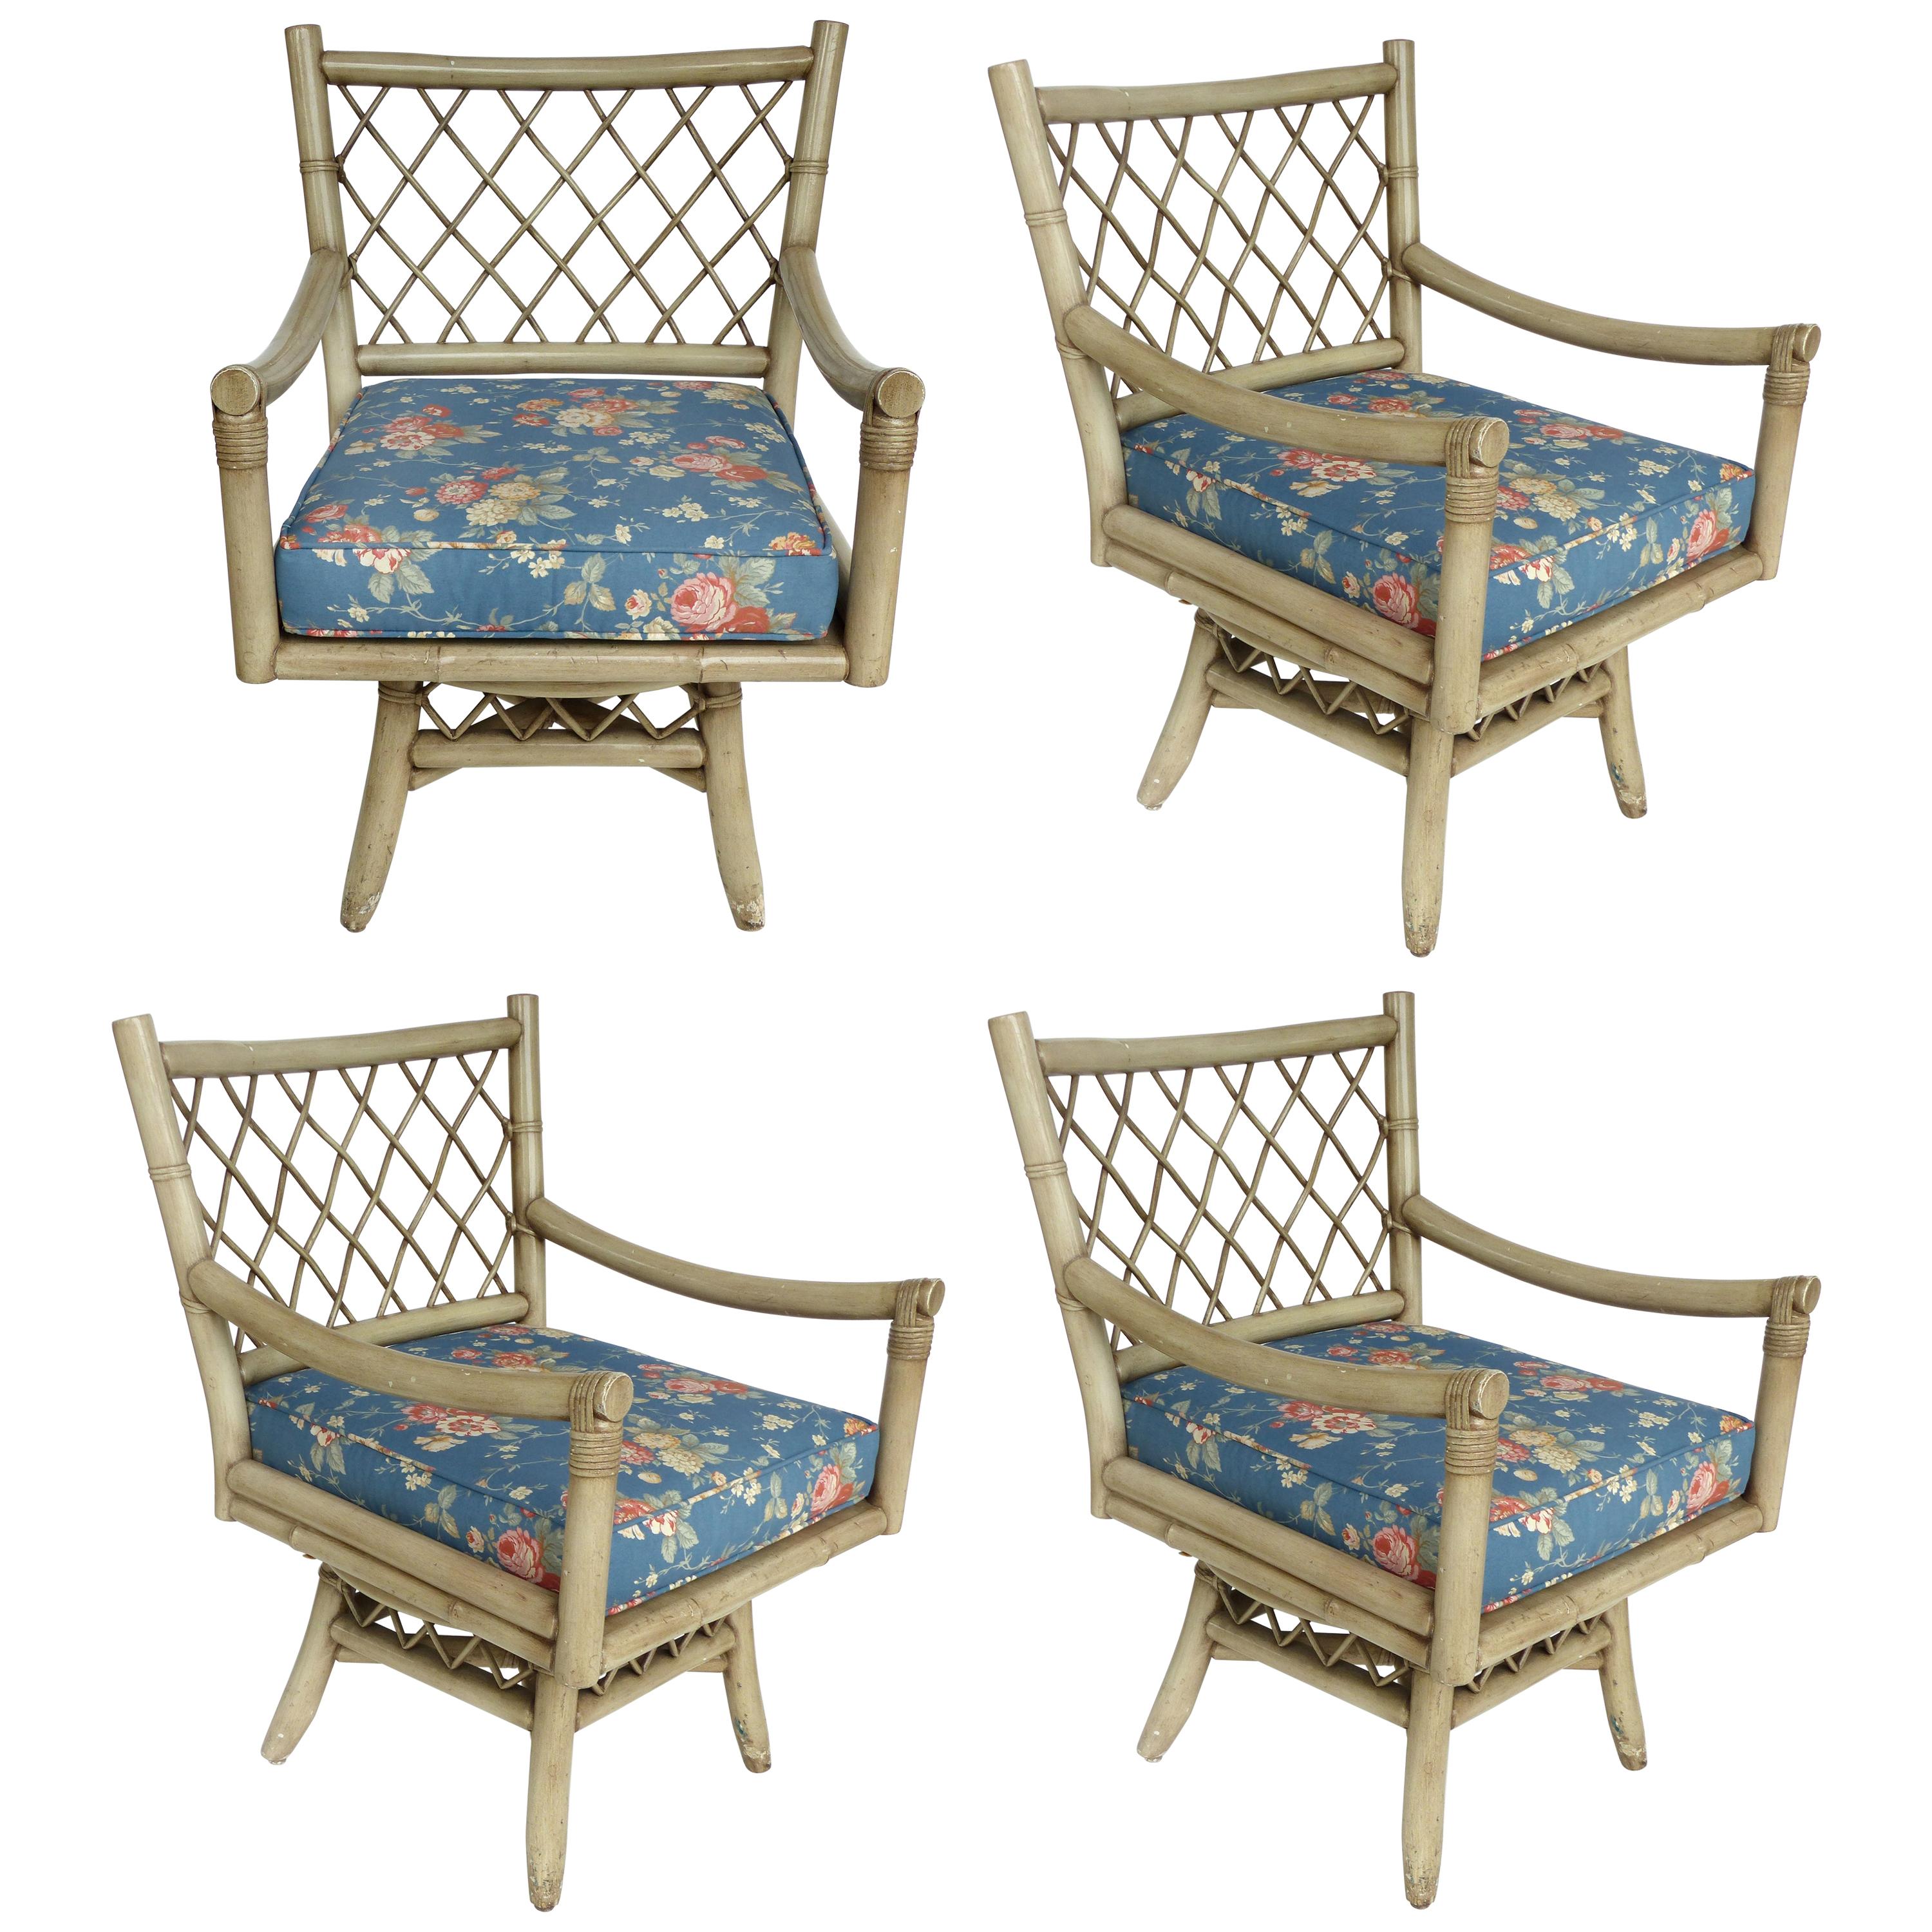 Vintage Bent Rattan Armchairs with Loose Cushions, Two Pair Available